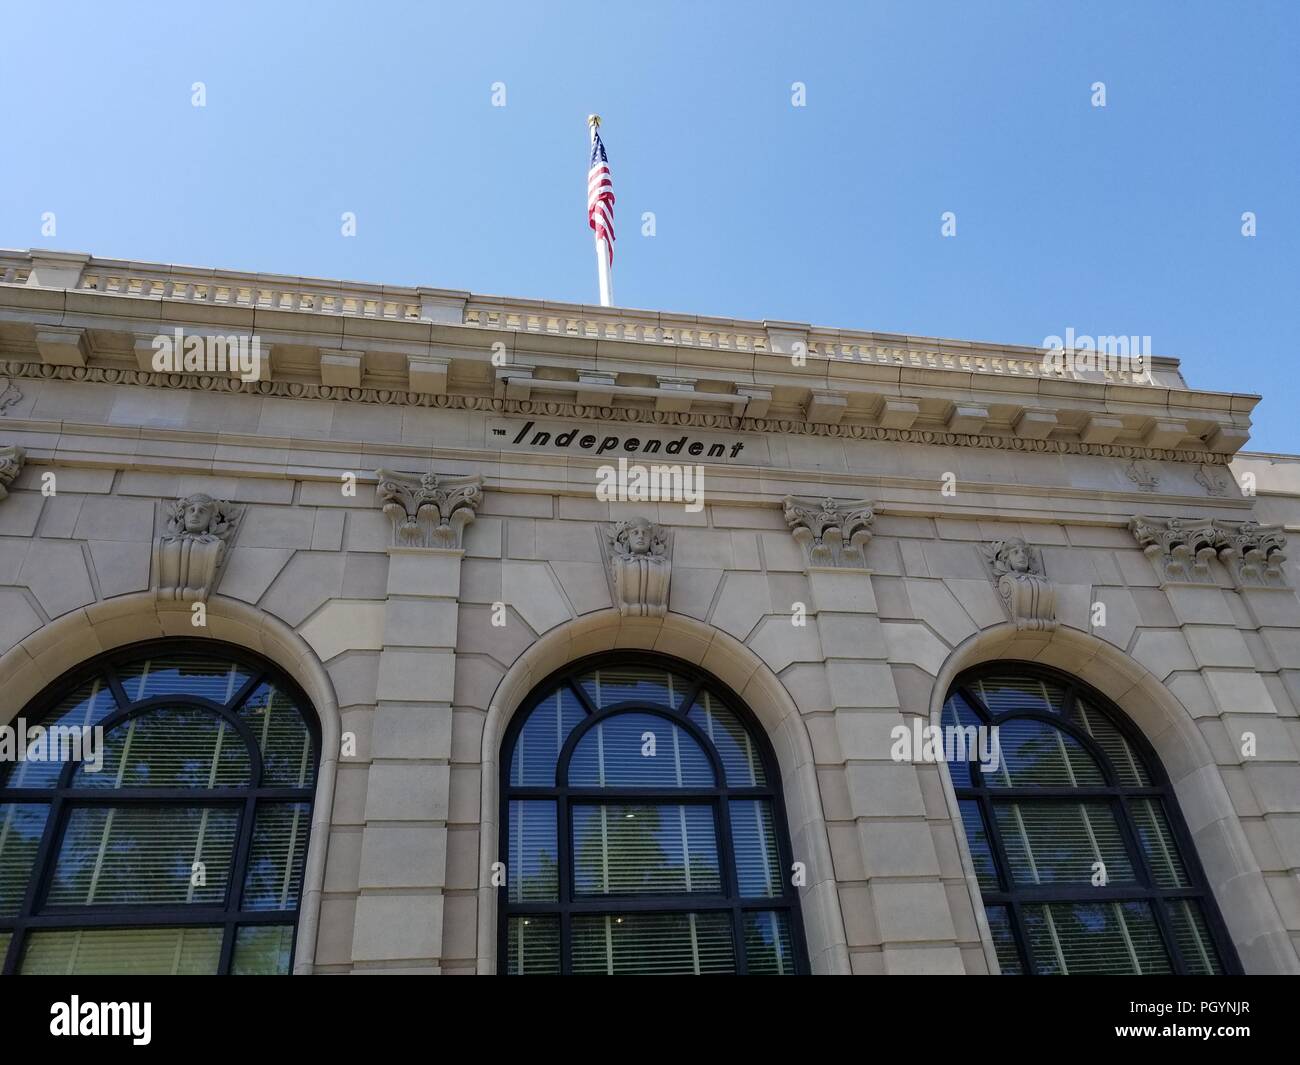 Facade of historic Bank of Italy building, which originally housed the 13th branch of the Bank of Italy, later the Bank of America, in downtown Livermore, California, August 16, 2018. () Stock Photo